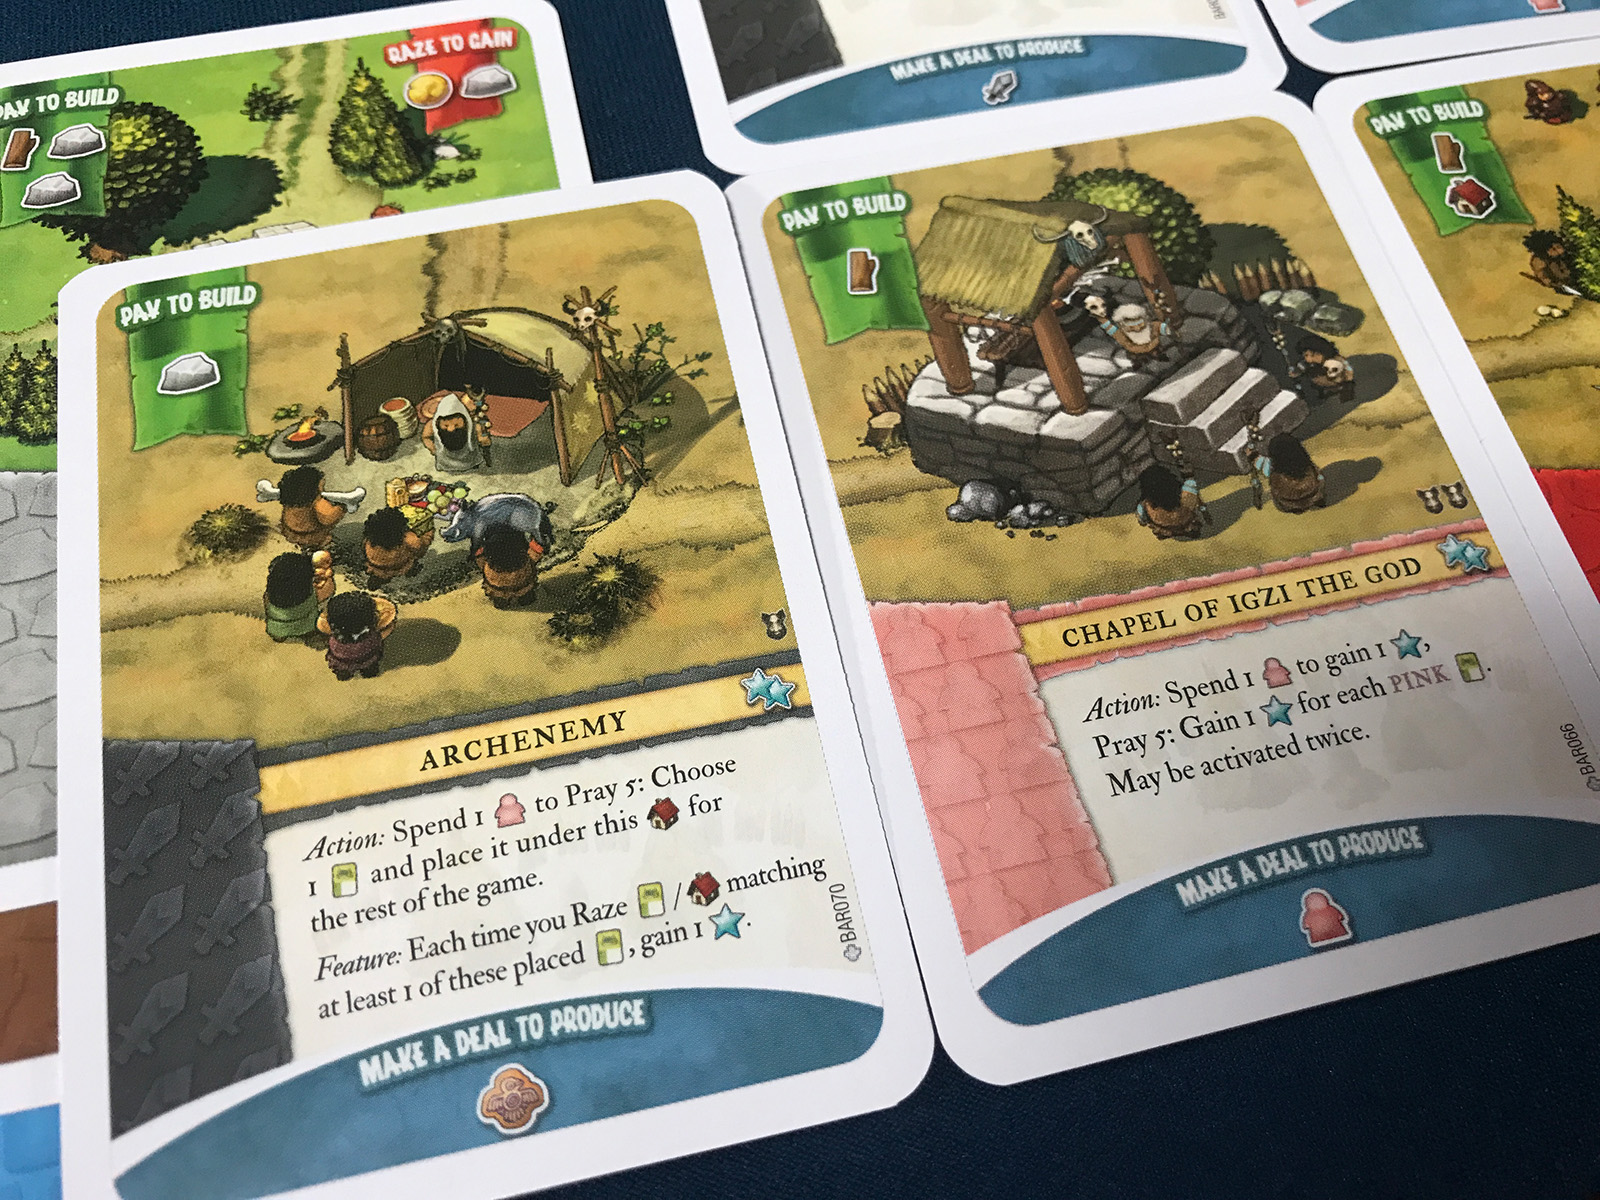 Interesting Card Additions with Very Random Mechanics in Imperial Settlers